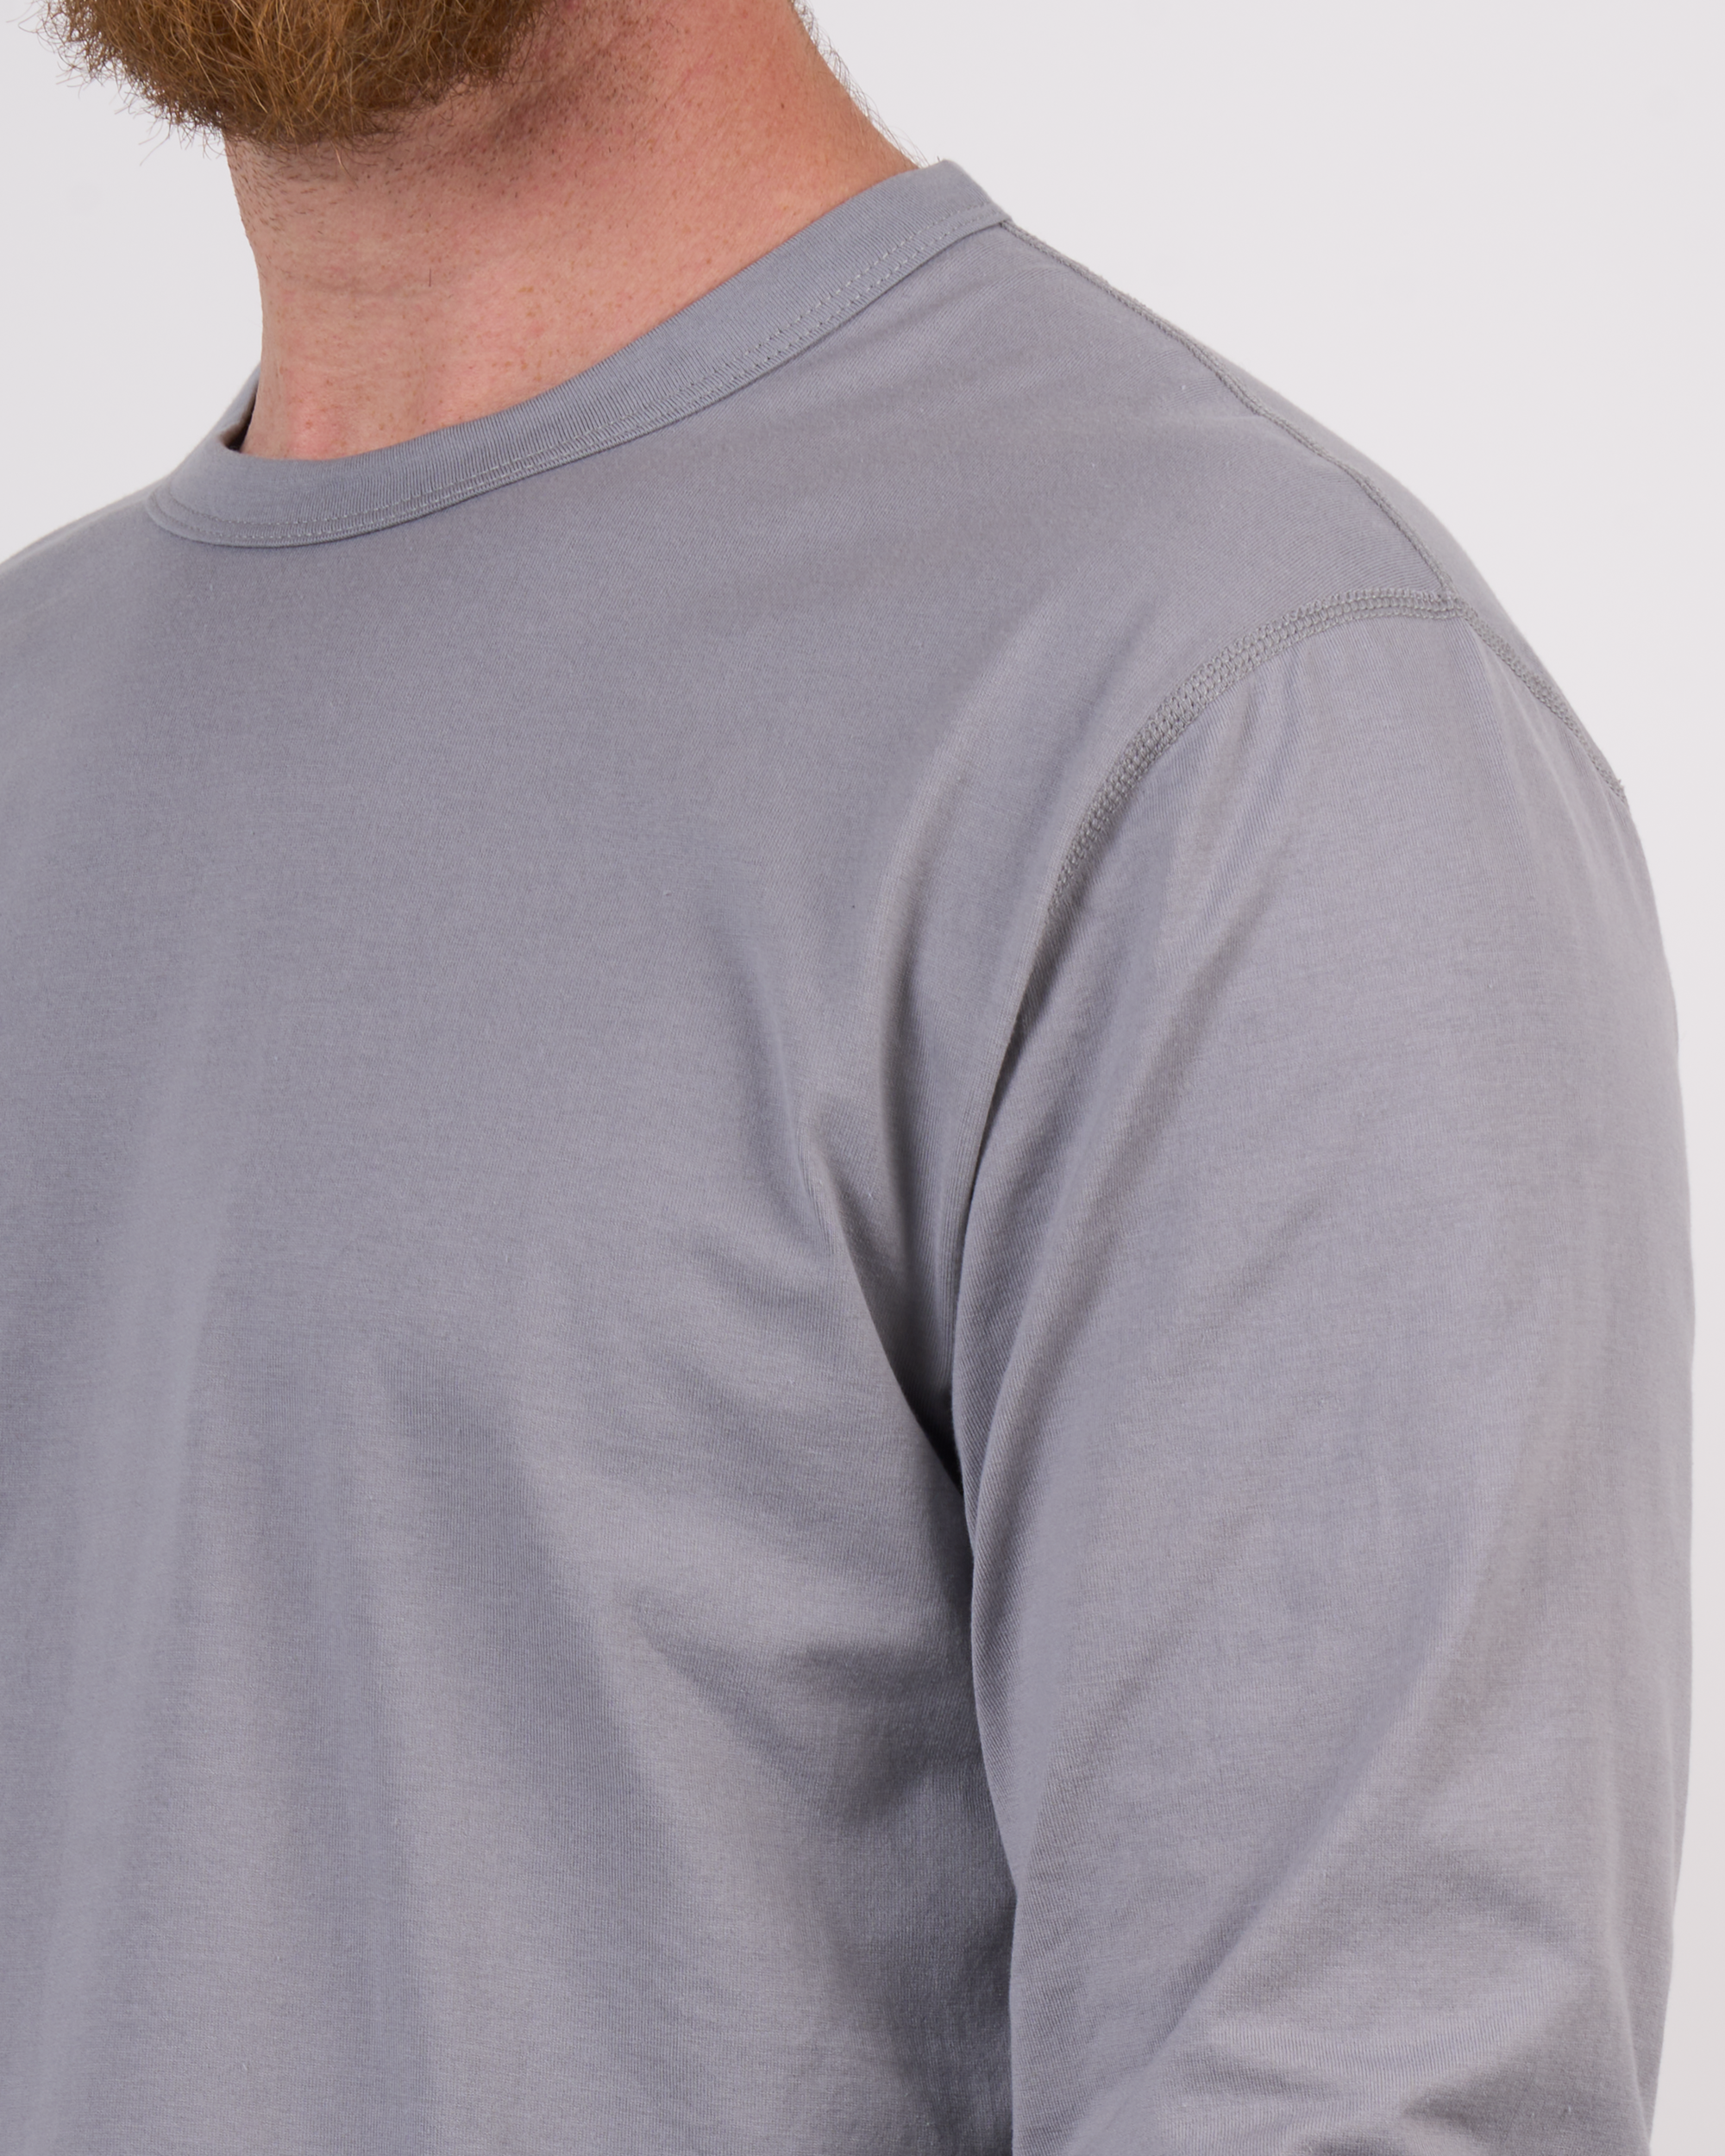 Foreign Rider Co Supima Cotton Grey Long Sleeve T-Shirt Shoulder Flat-lock Stitch Detail